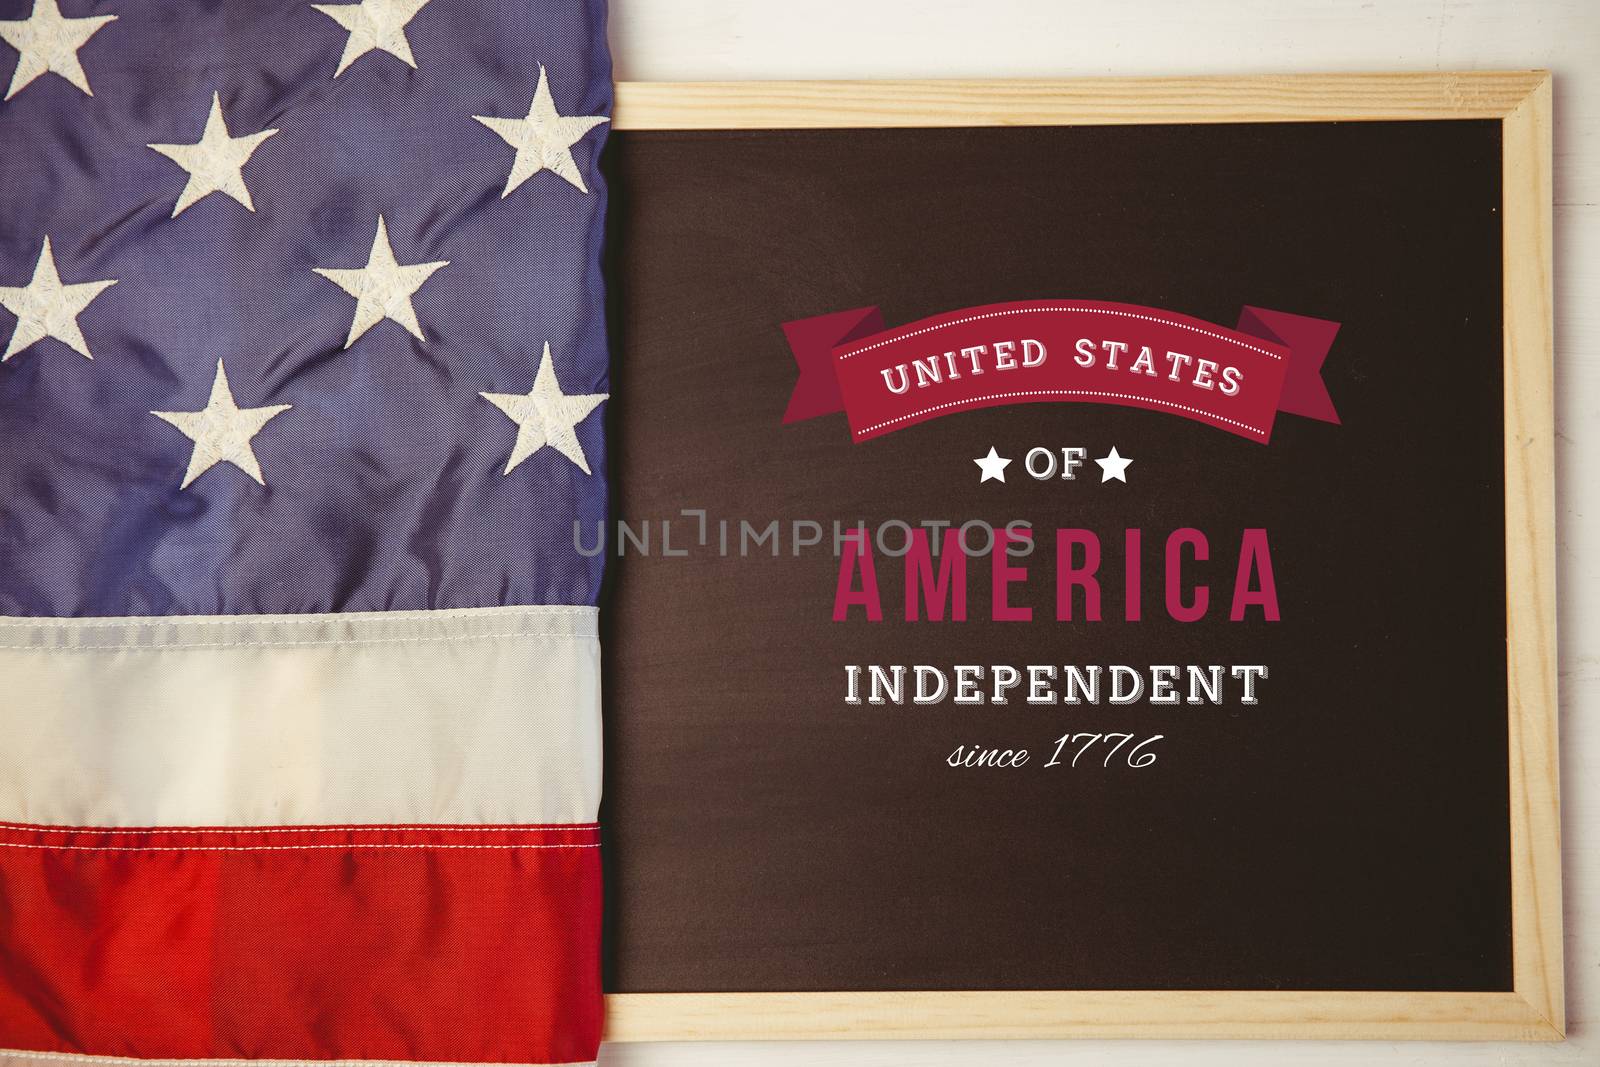 Composite image of independence day graphic by Wavebreakmedia